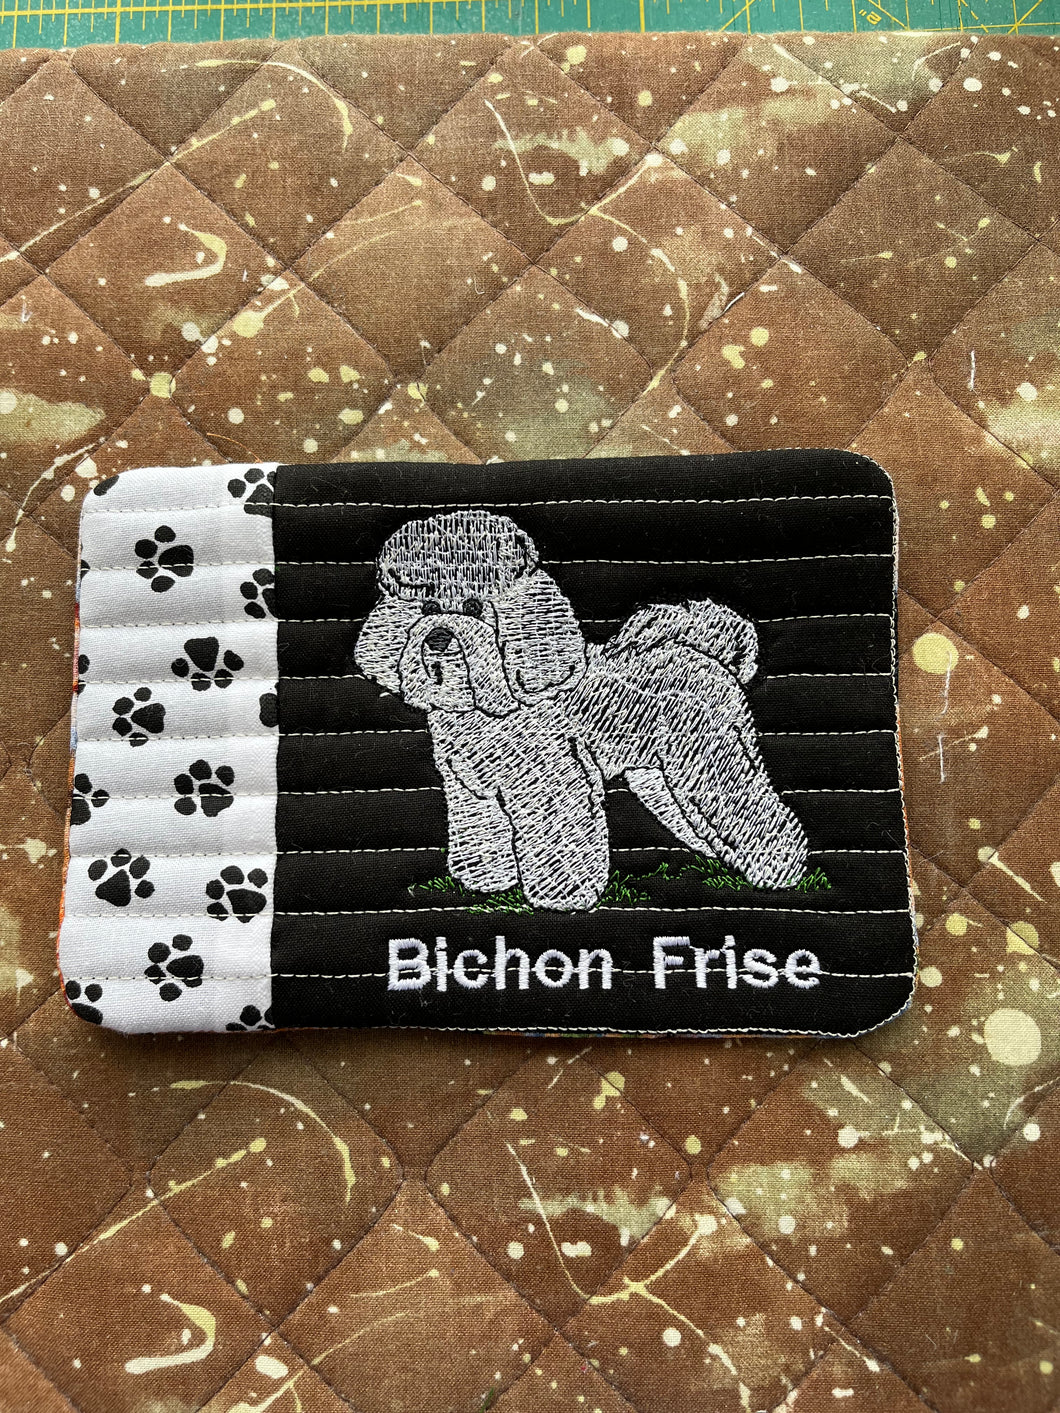 Is the Bichon Frise your favorite Dog?   You're going to love this! On black background